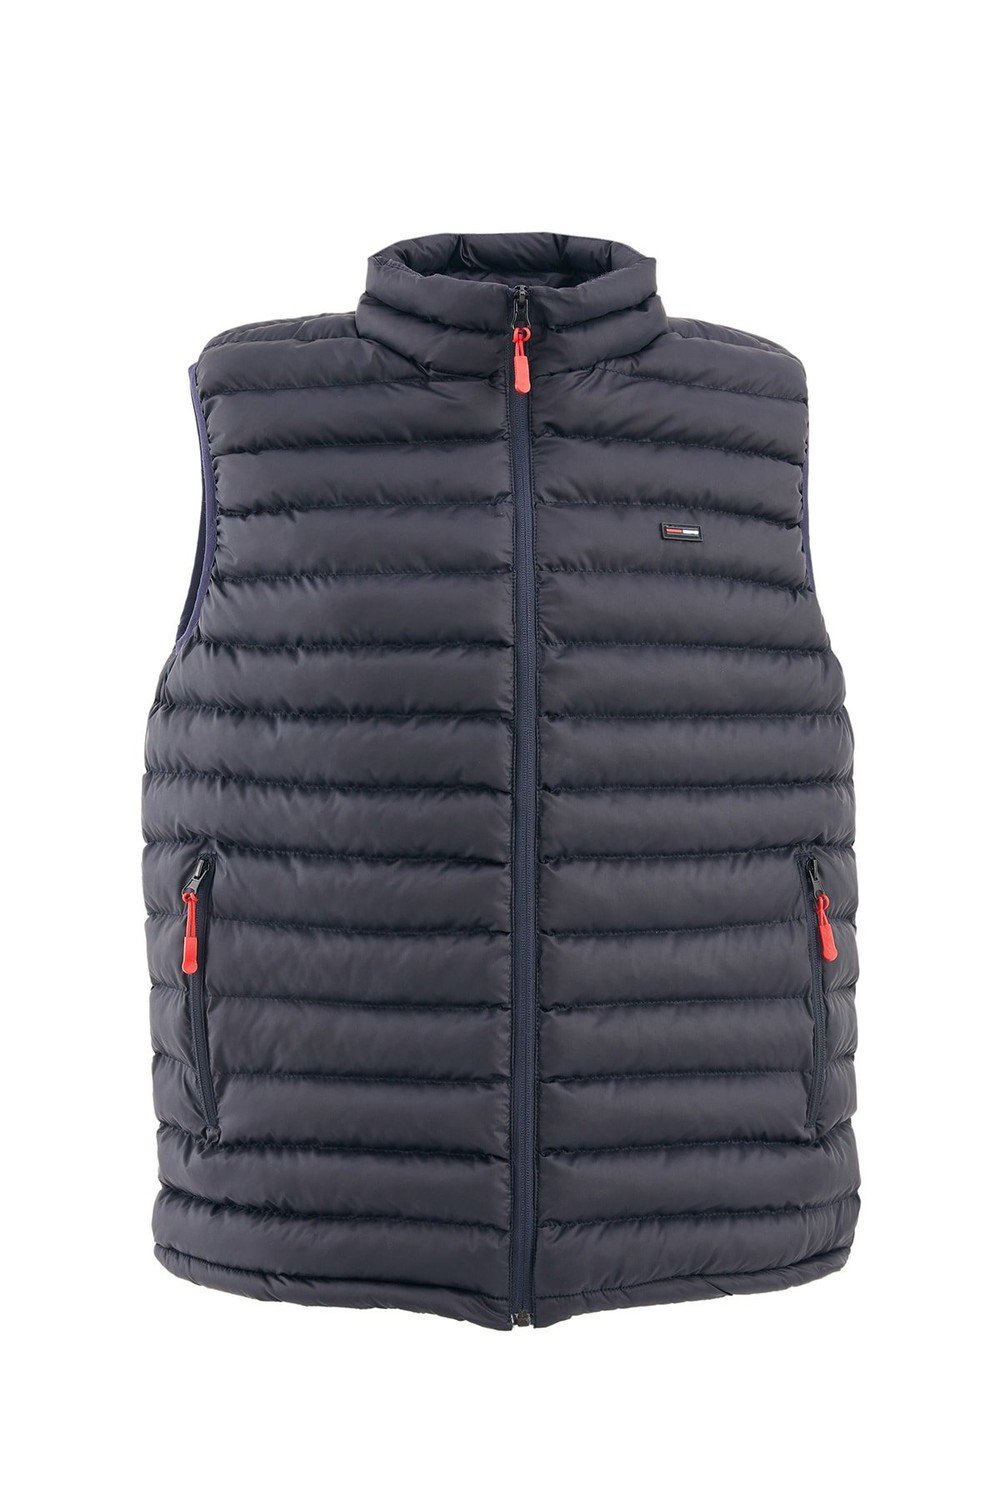 D1fference Men's Lined Water And Windproof Regular Fit Navy Blue Inflatable Vest.